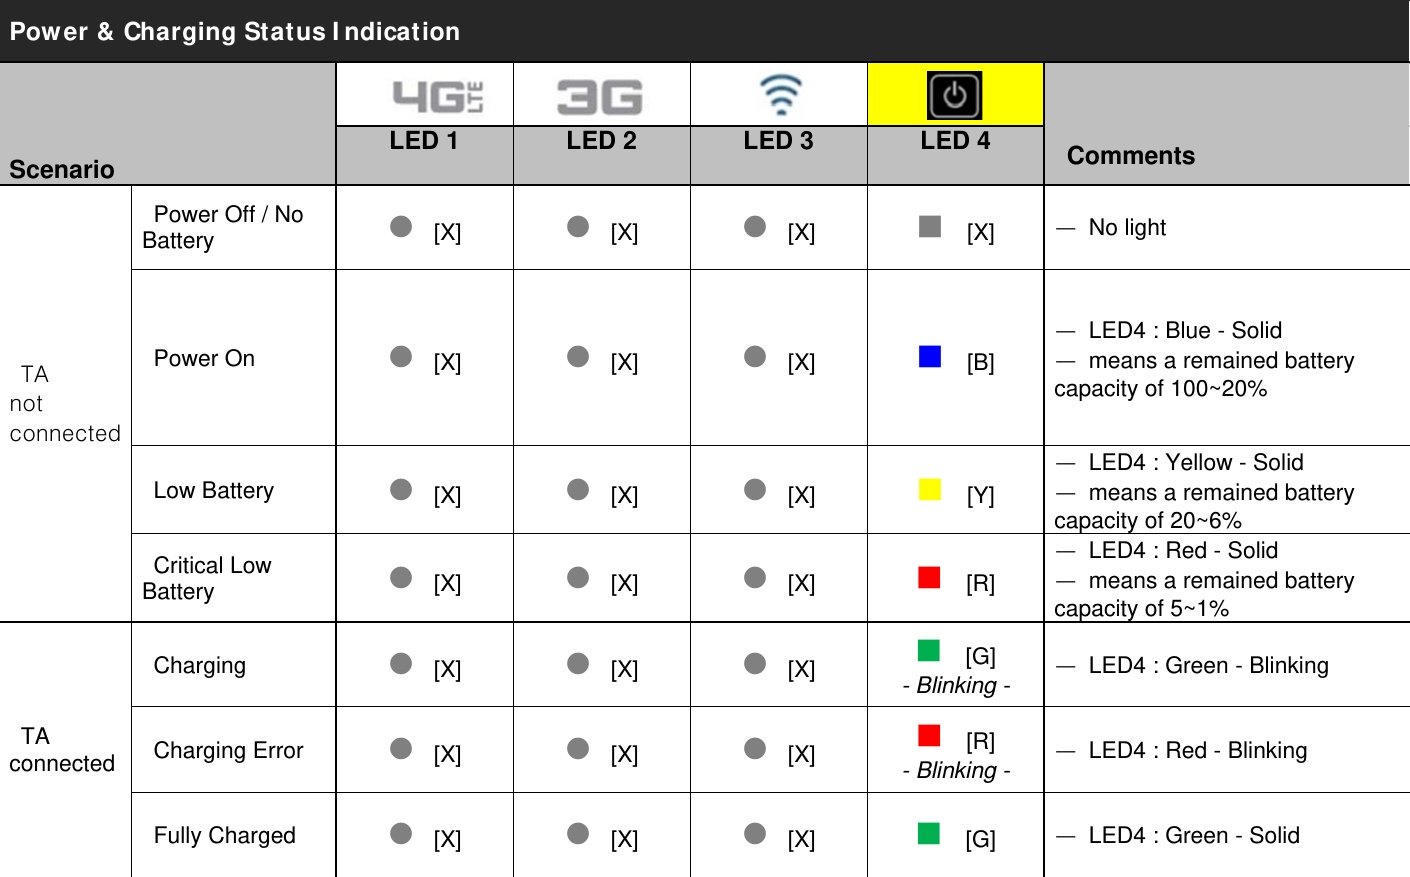 Power &amp; Charging Status I ndication          Scenario   LED 1  LED 2  LED 3  LED 4   Comments  TA  t t  Power Off / No Battery   [X][X][X][X]ㅡ No light   Power On  [X][X][X][B]ㅡ  LED4 : Blue - Solid ㅡ  means a remained battery capacity of 100~20%  Low Battery  [X][X][X][Y]ㅡ  LED4 : Yellow - Solid ㅡ  means a remained battery capacity of 20~6%  Critical Low Battery  [X][X][X][R]ㅡ  LED4 : Red - Solid ㅡ  means a remained battery capacity of 5~1%  TA connected Charging  [X][X][X][G] - Blinking -ㅡ  LED4 : Green - Blinking  Charging Error  [X][X][X][R] - Blinking -ㅡ  LED4 : Red - Blinking  Fully Charged  [X][X][X][G]ㅡ  LED4 : Green - Solid  